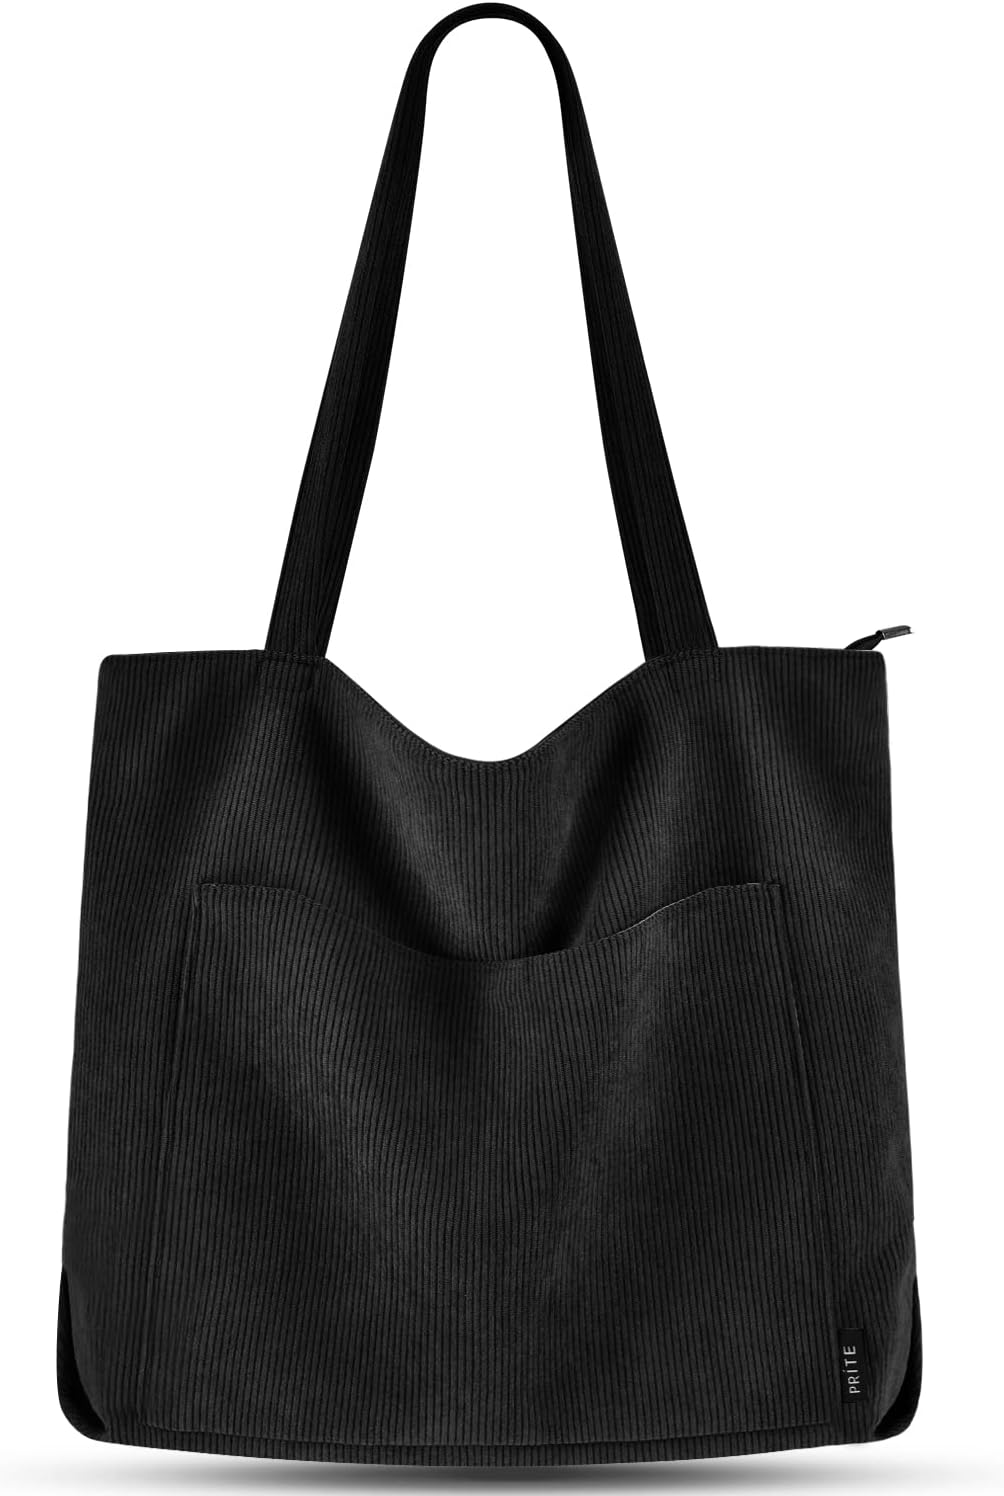 Large Corduroy Shoulder Tote Bag with Zipper and Pockets | GreenLifeHuman Emporium